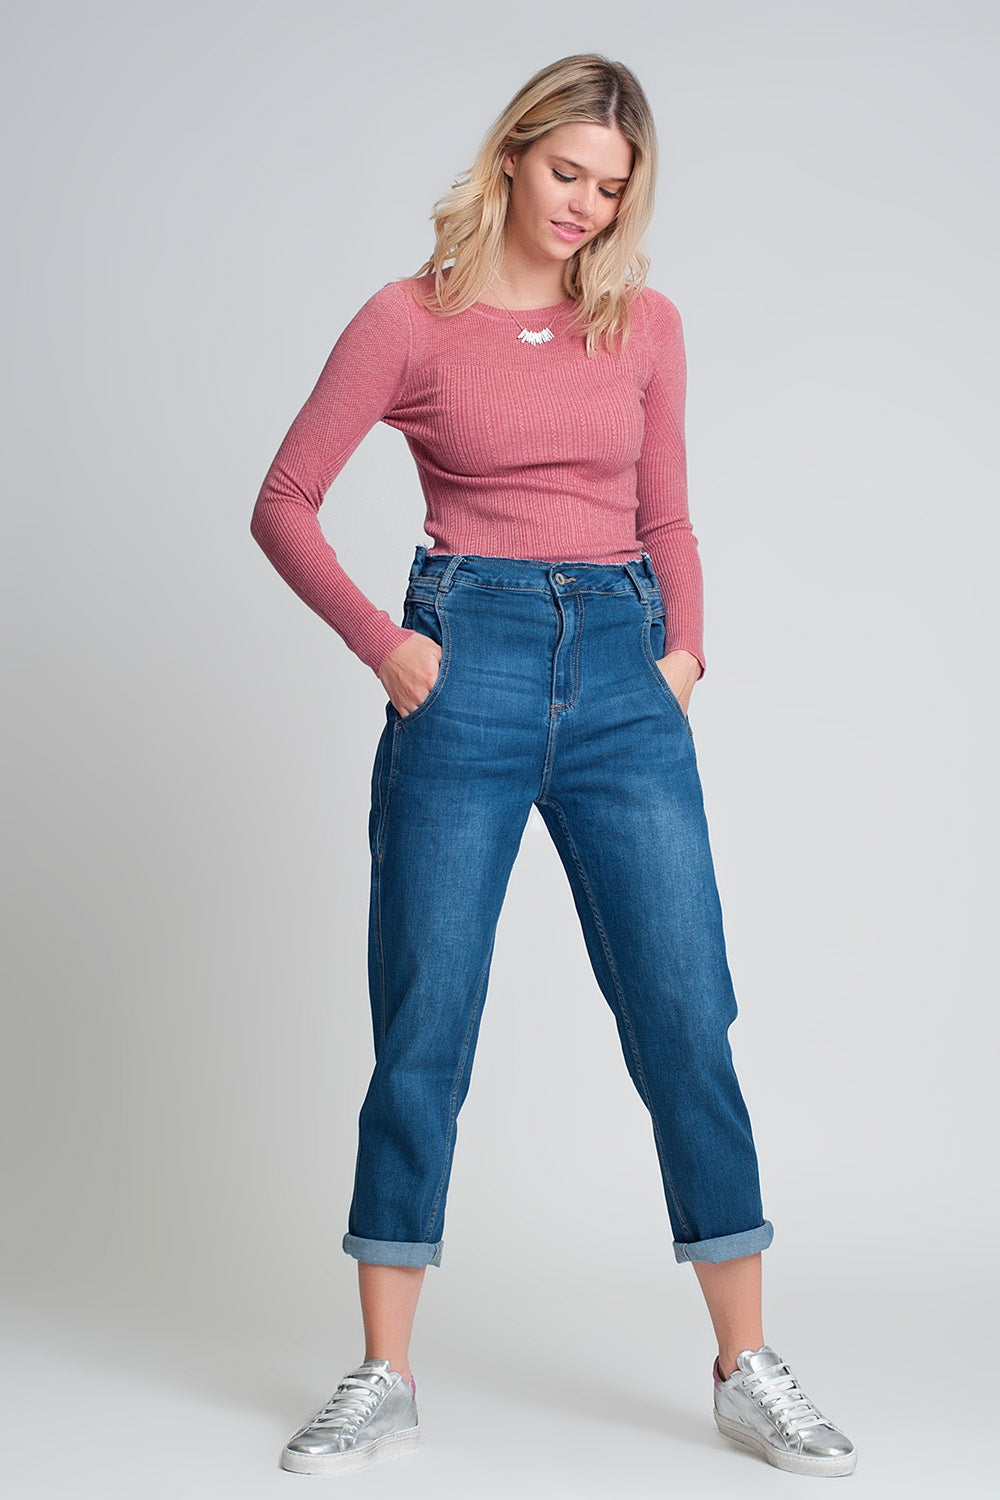 crew neck ribbed sweater in pink Szua Store